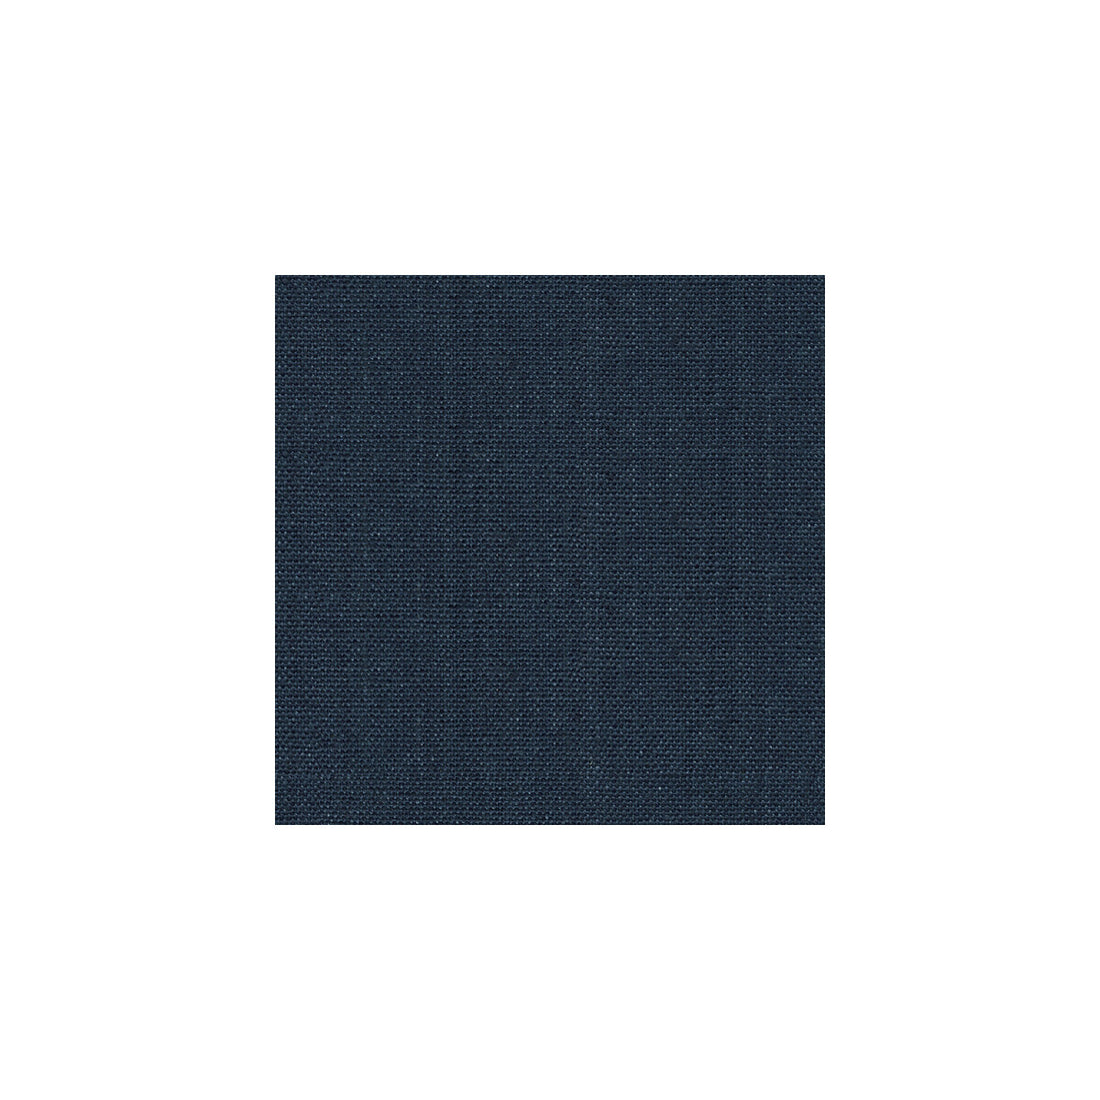 Watermill fabric in navy color - pattern 30421.50.0 - by Kravet Basics in the Perfect Plains collection